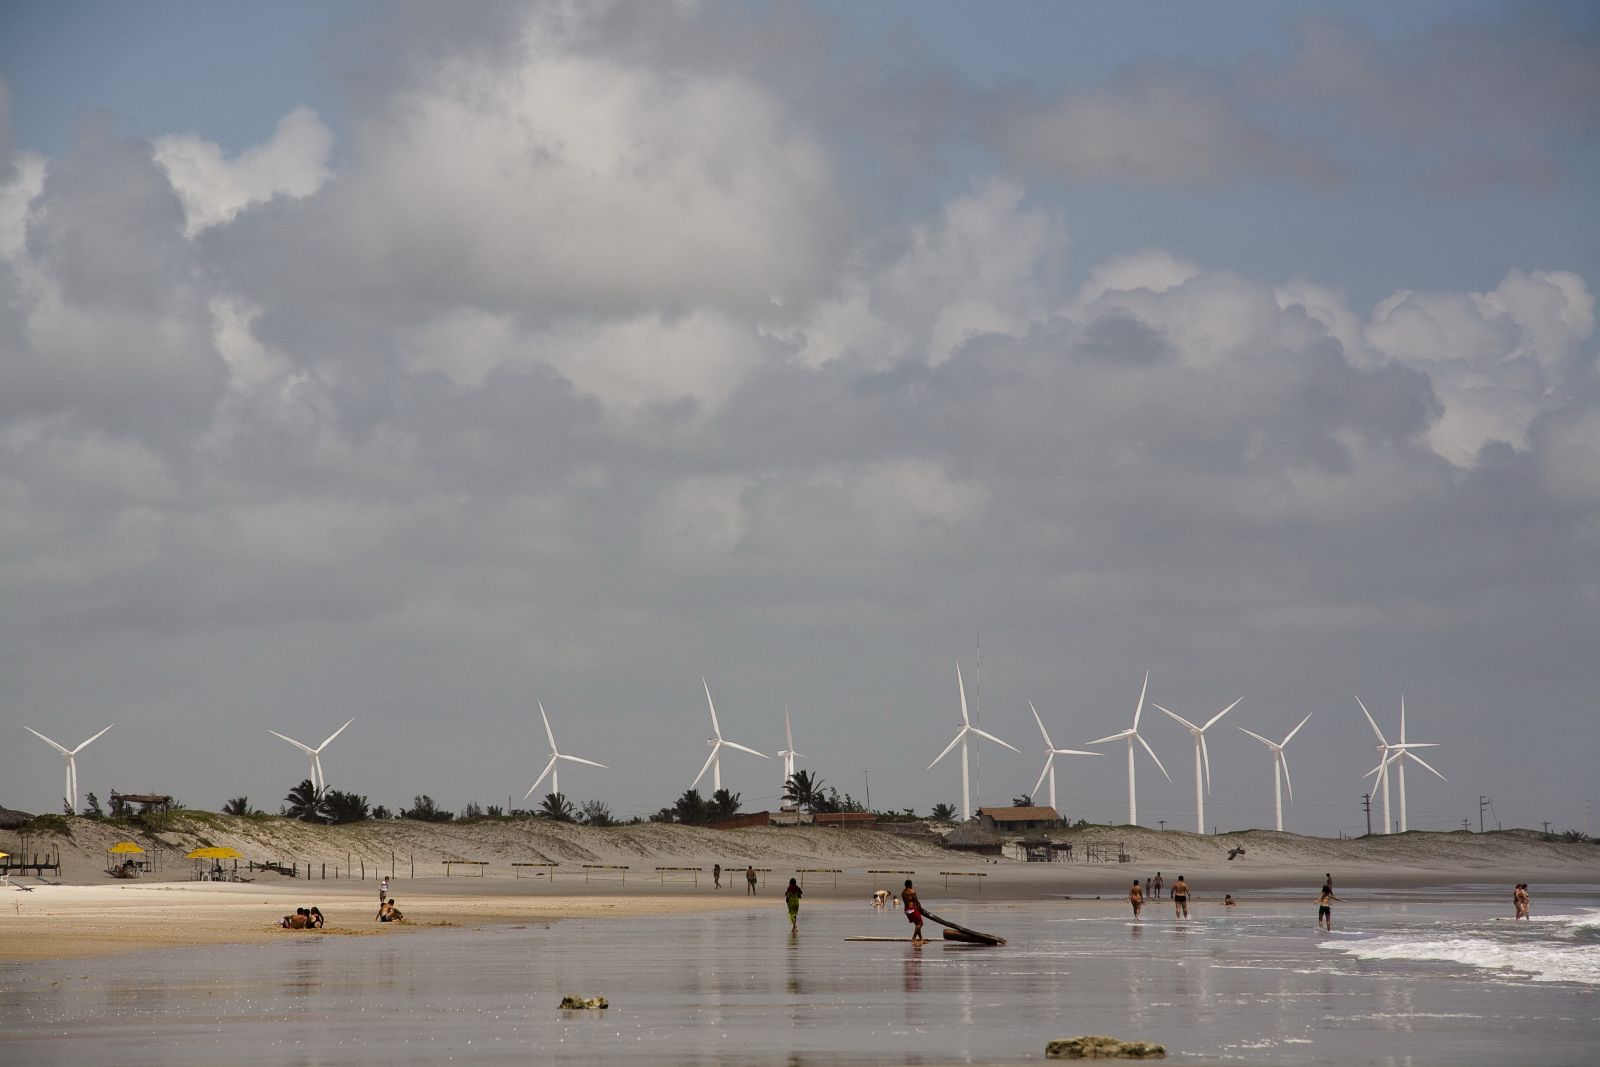 There is growing business investment in renewable energies: wind farm in Ceará in north-eastern Brazil.